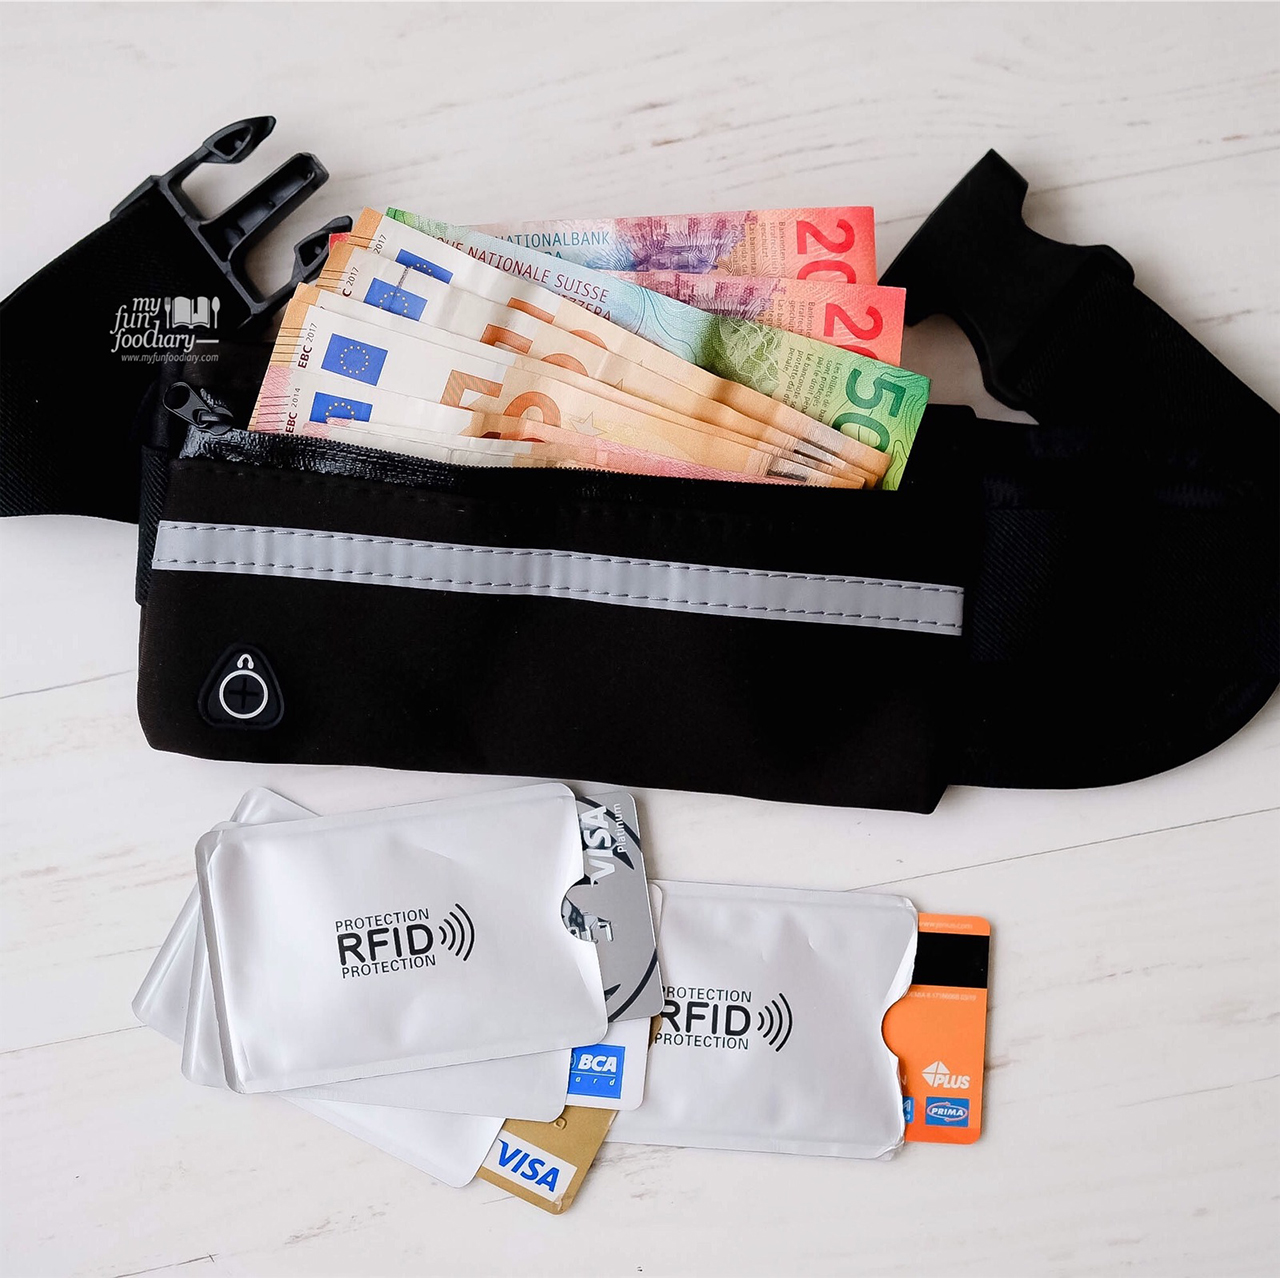 use Money Belt and RFIC case to secure your money travel tips how to avoid pickpockets in Europe by Myfunfoodiary